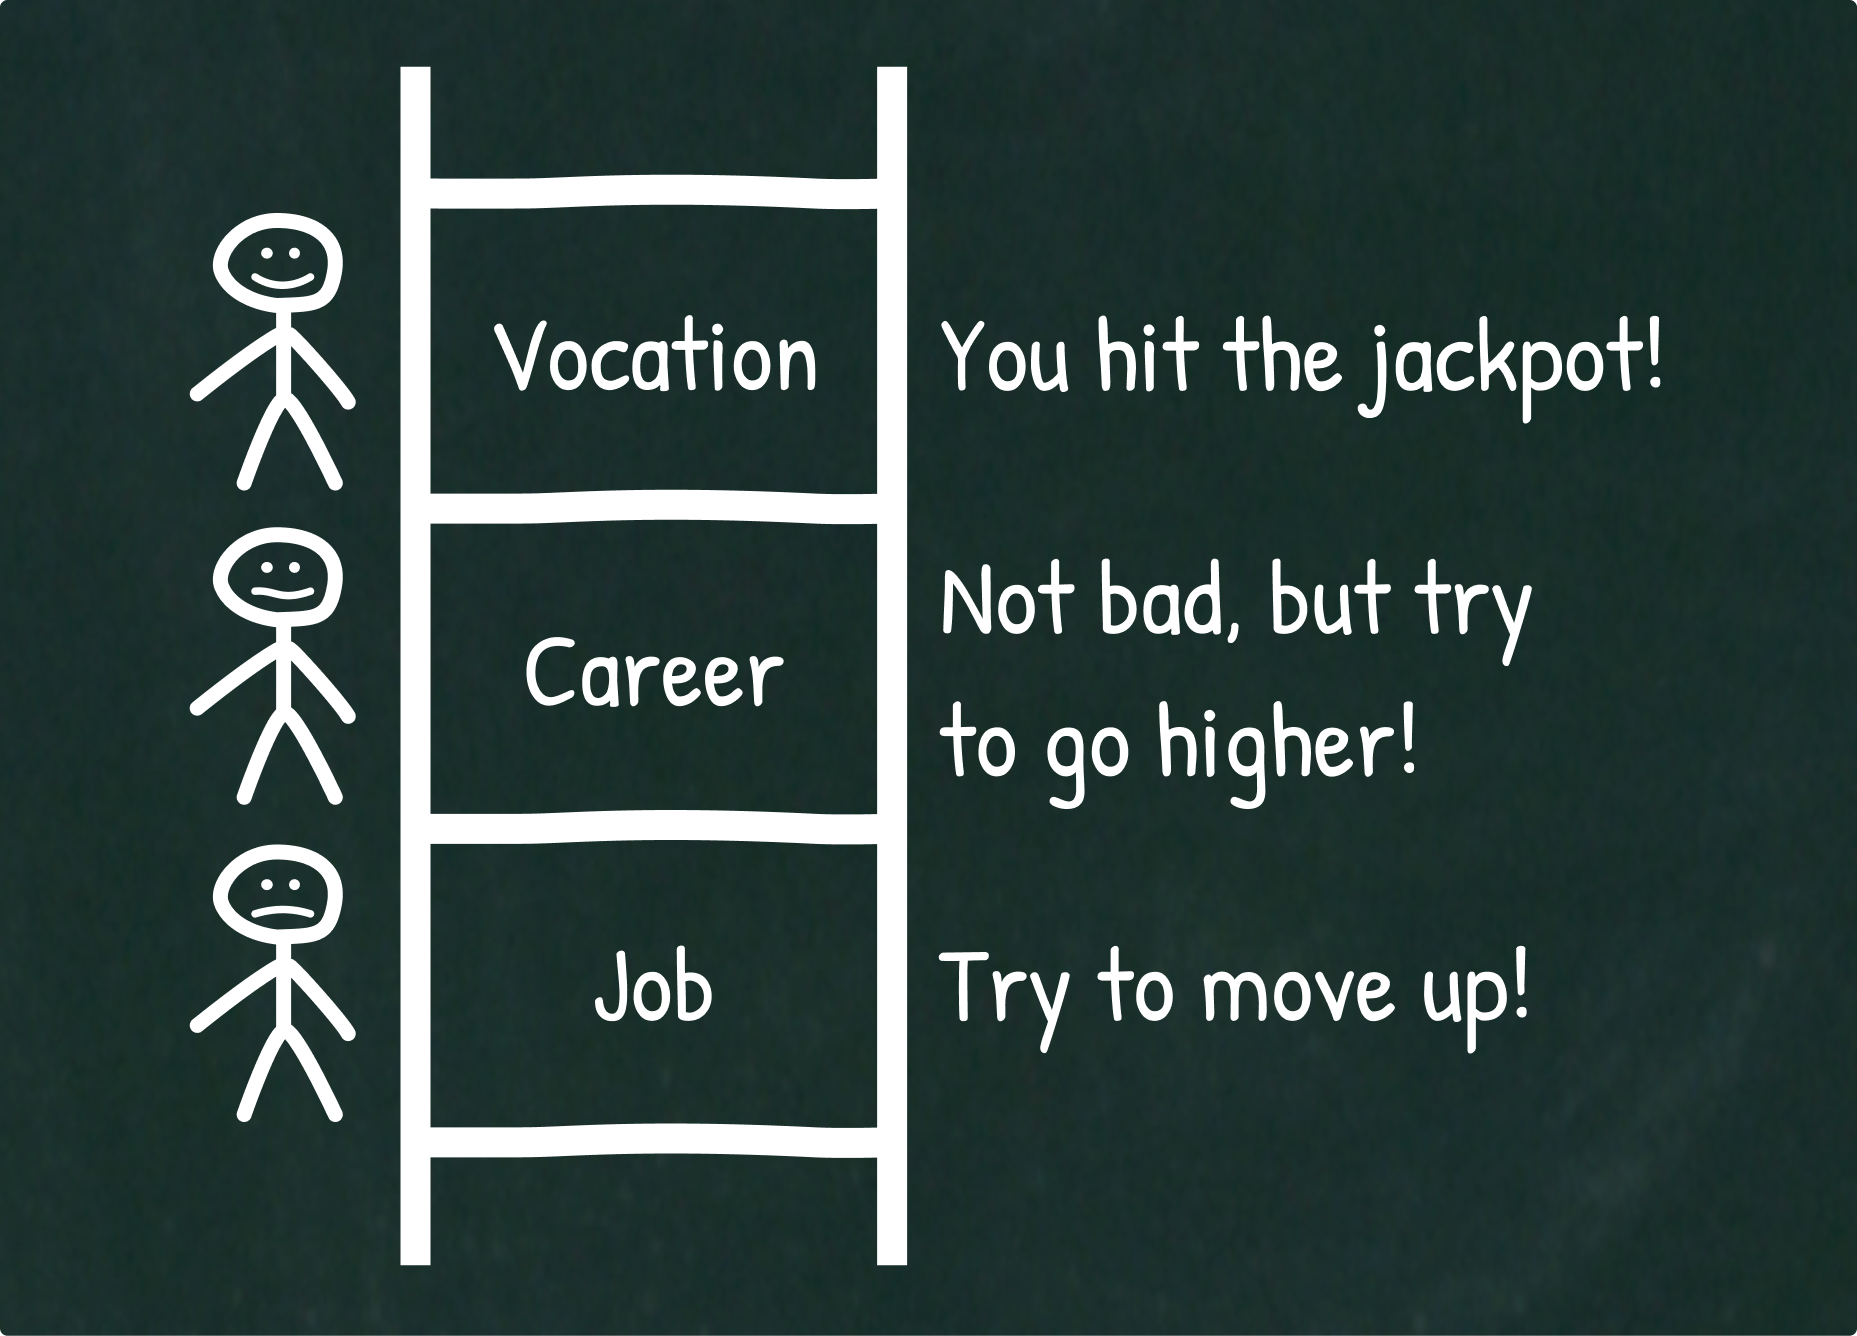 Ladders of kinds of work. The ladder starts with a job, then moves up to a career, and finally moves up to a vocation